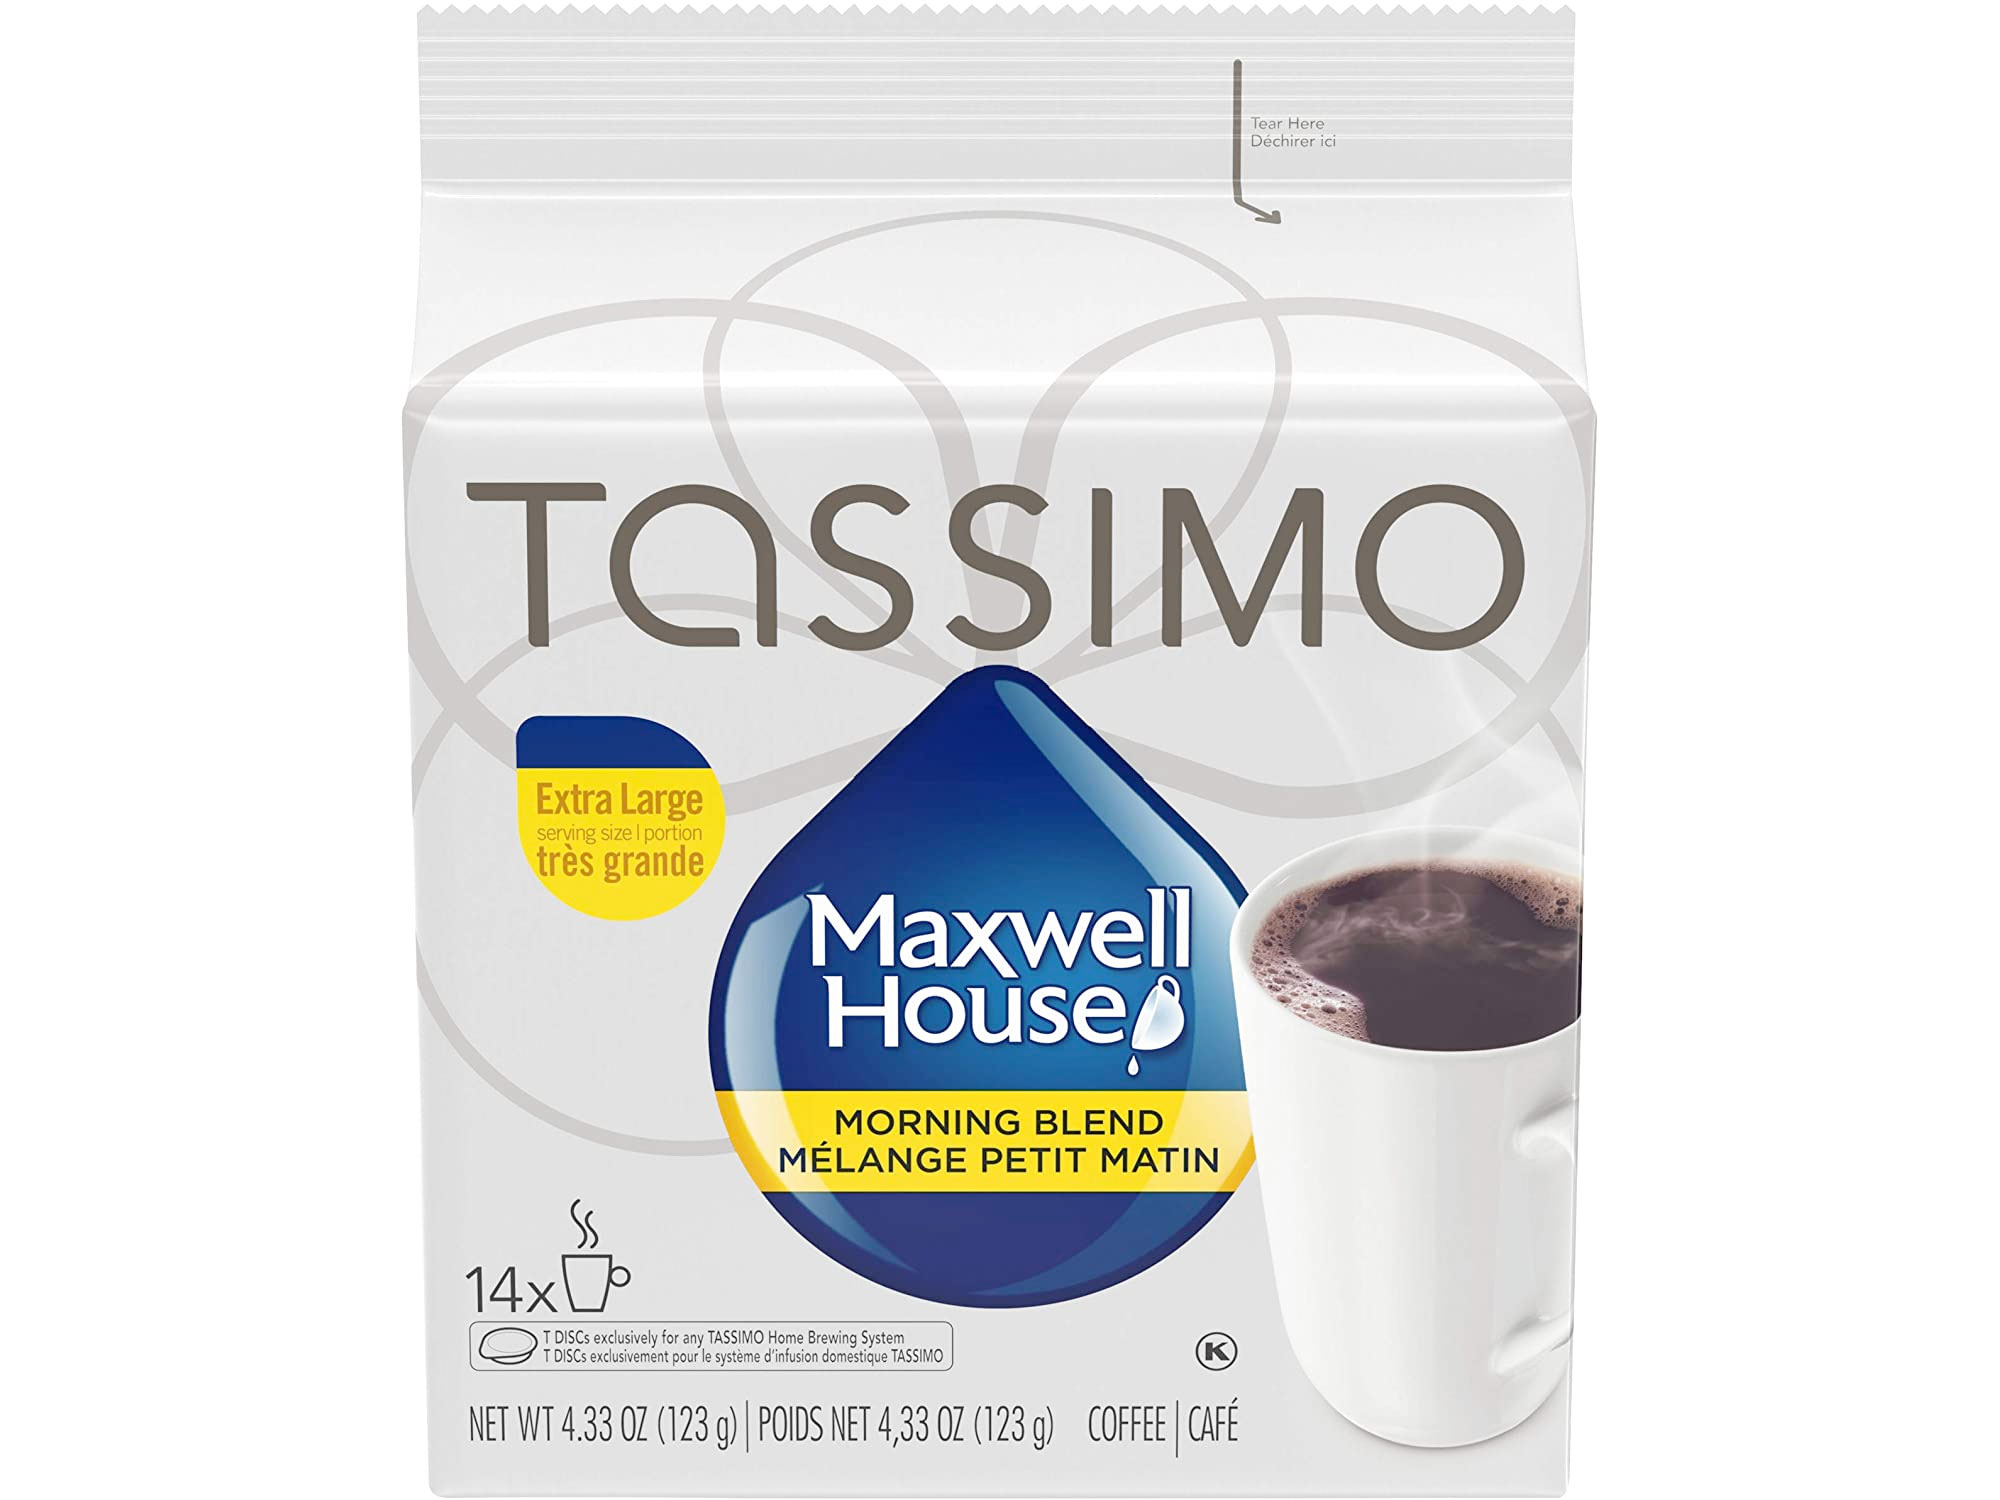 Amazon：Tassimo Maxwell House Morning Blend Coffee (14 T-Discs)只卖$3.88